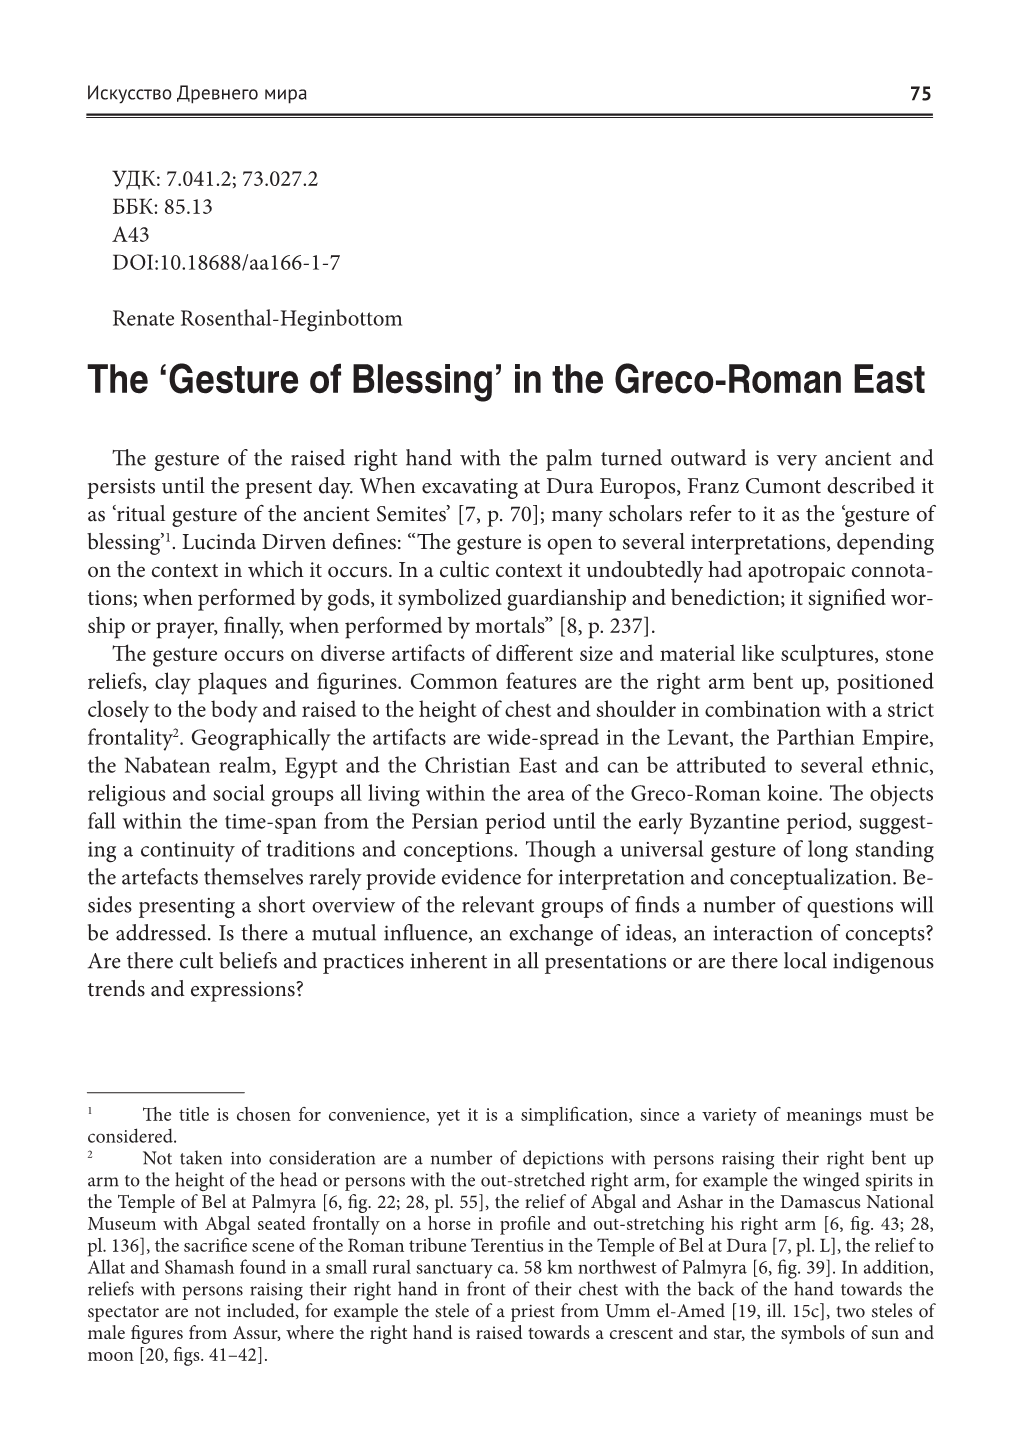 The 'Gesture of Blessing' in the Greco-Roman East